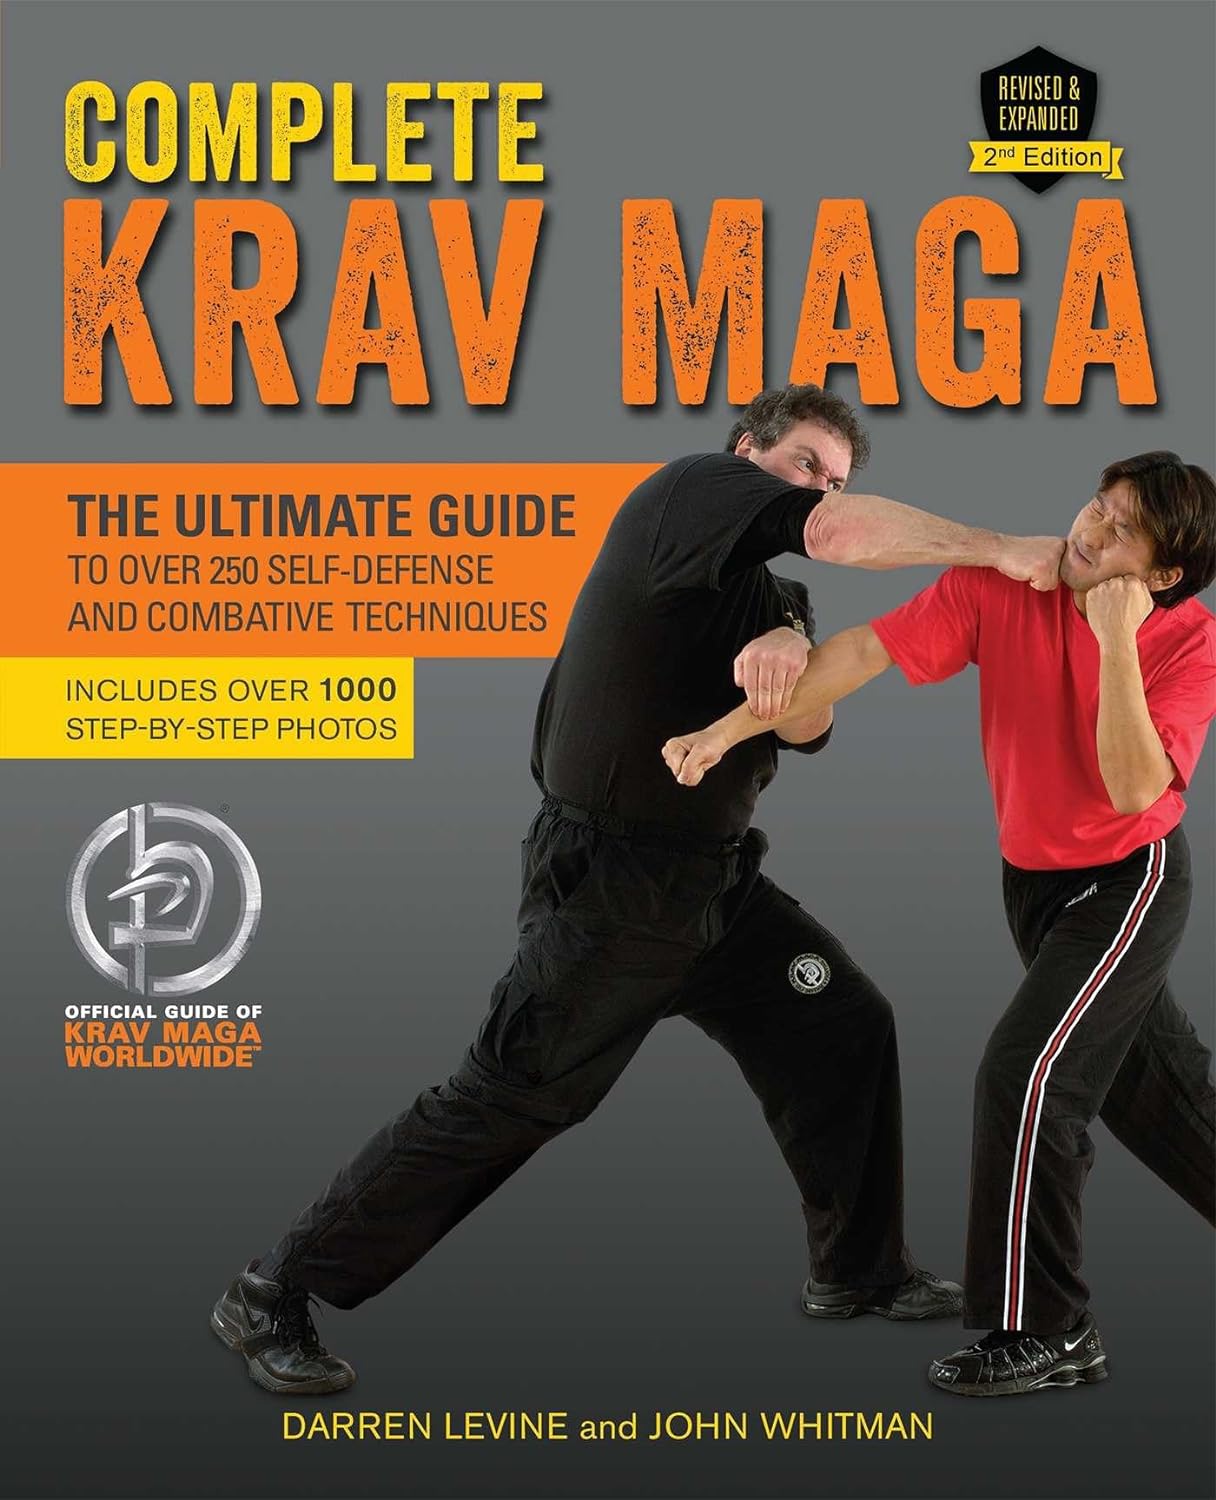 Complete Krav Maga: The Ultimate Guide to Over 250 Self-Defense and Combative Techniques Book by Darren Levine